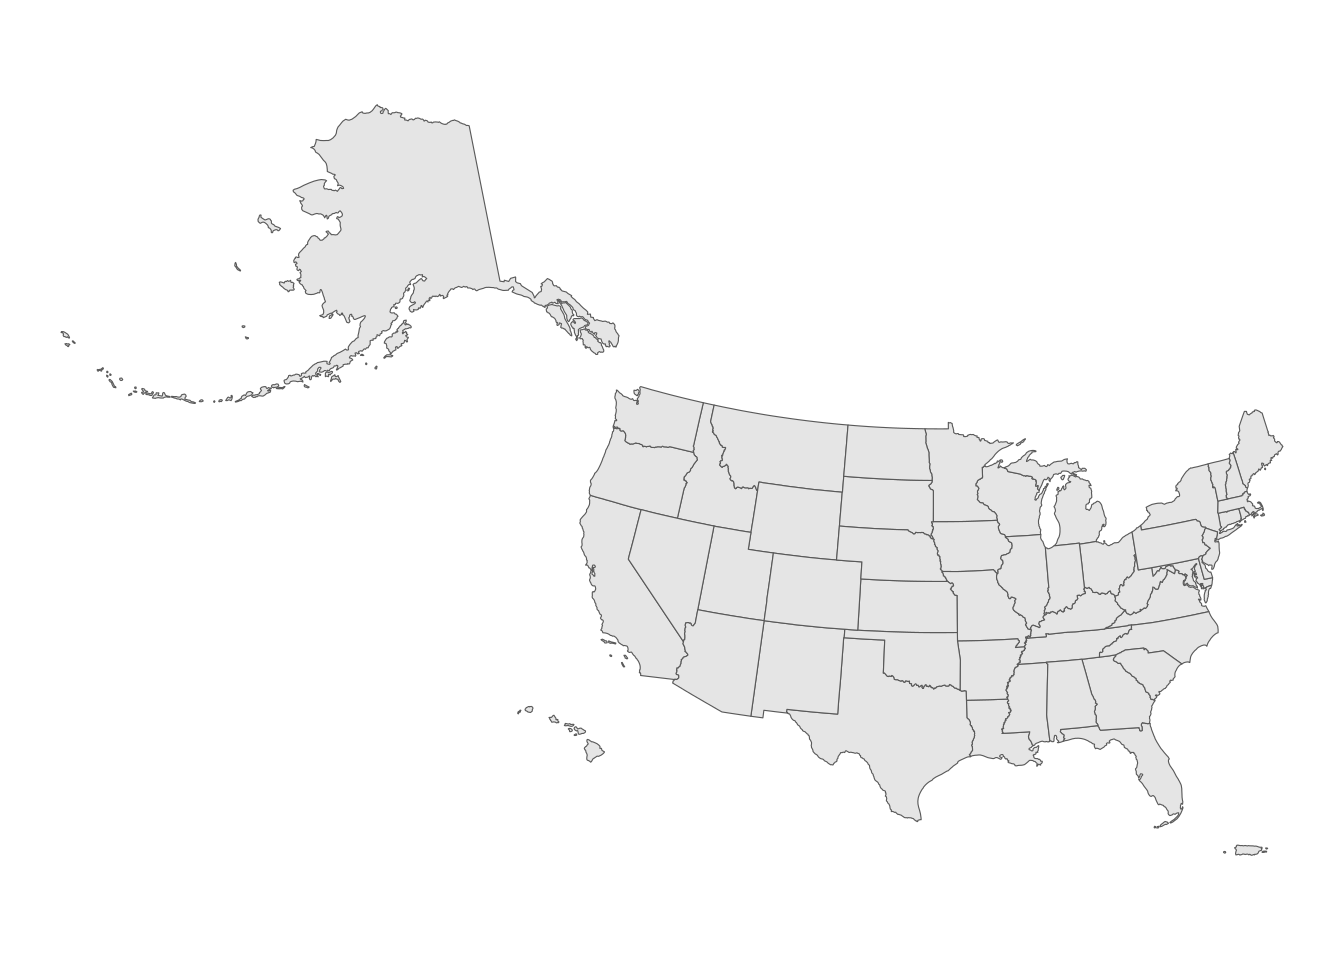 US states with shifted geometry and consistent area